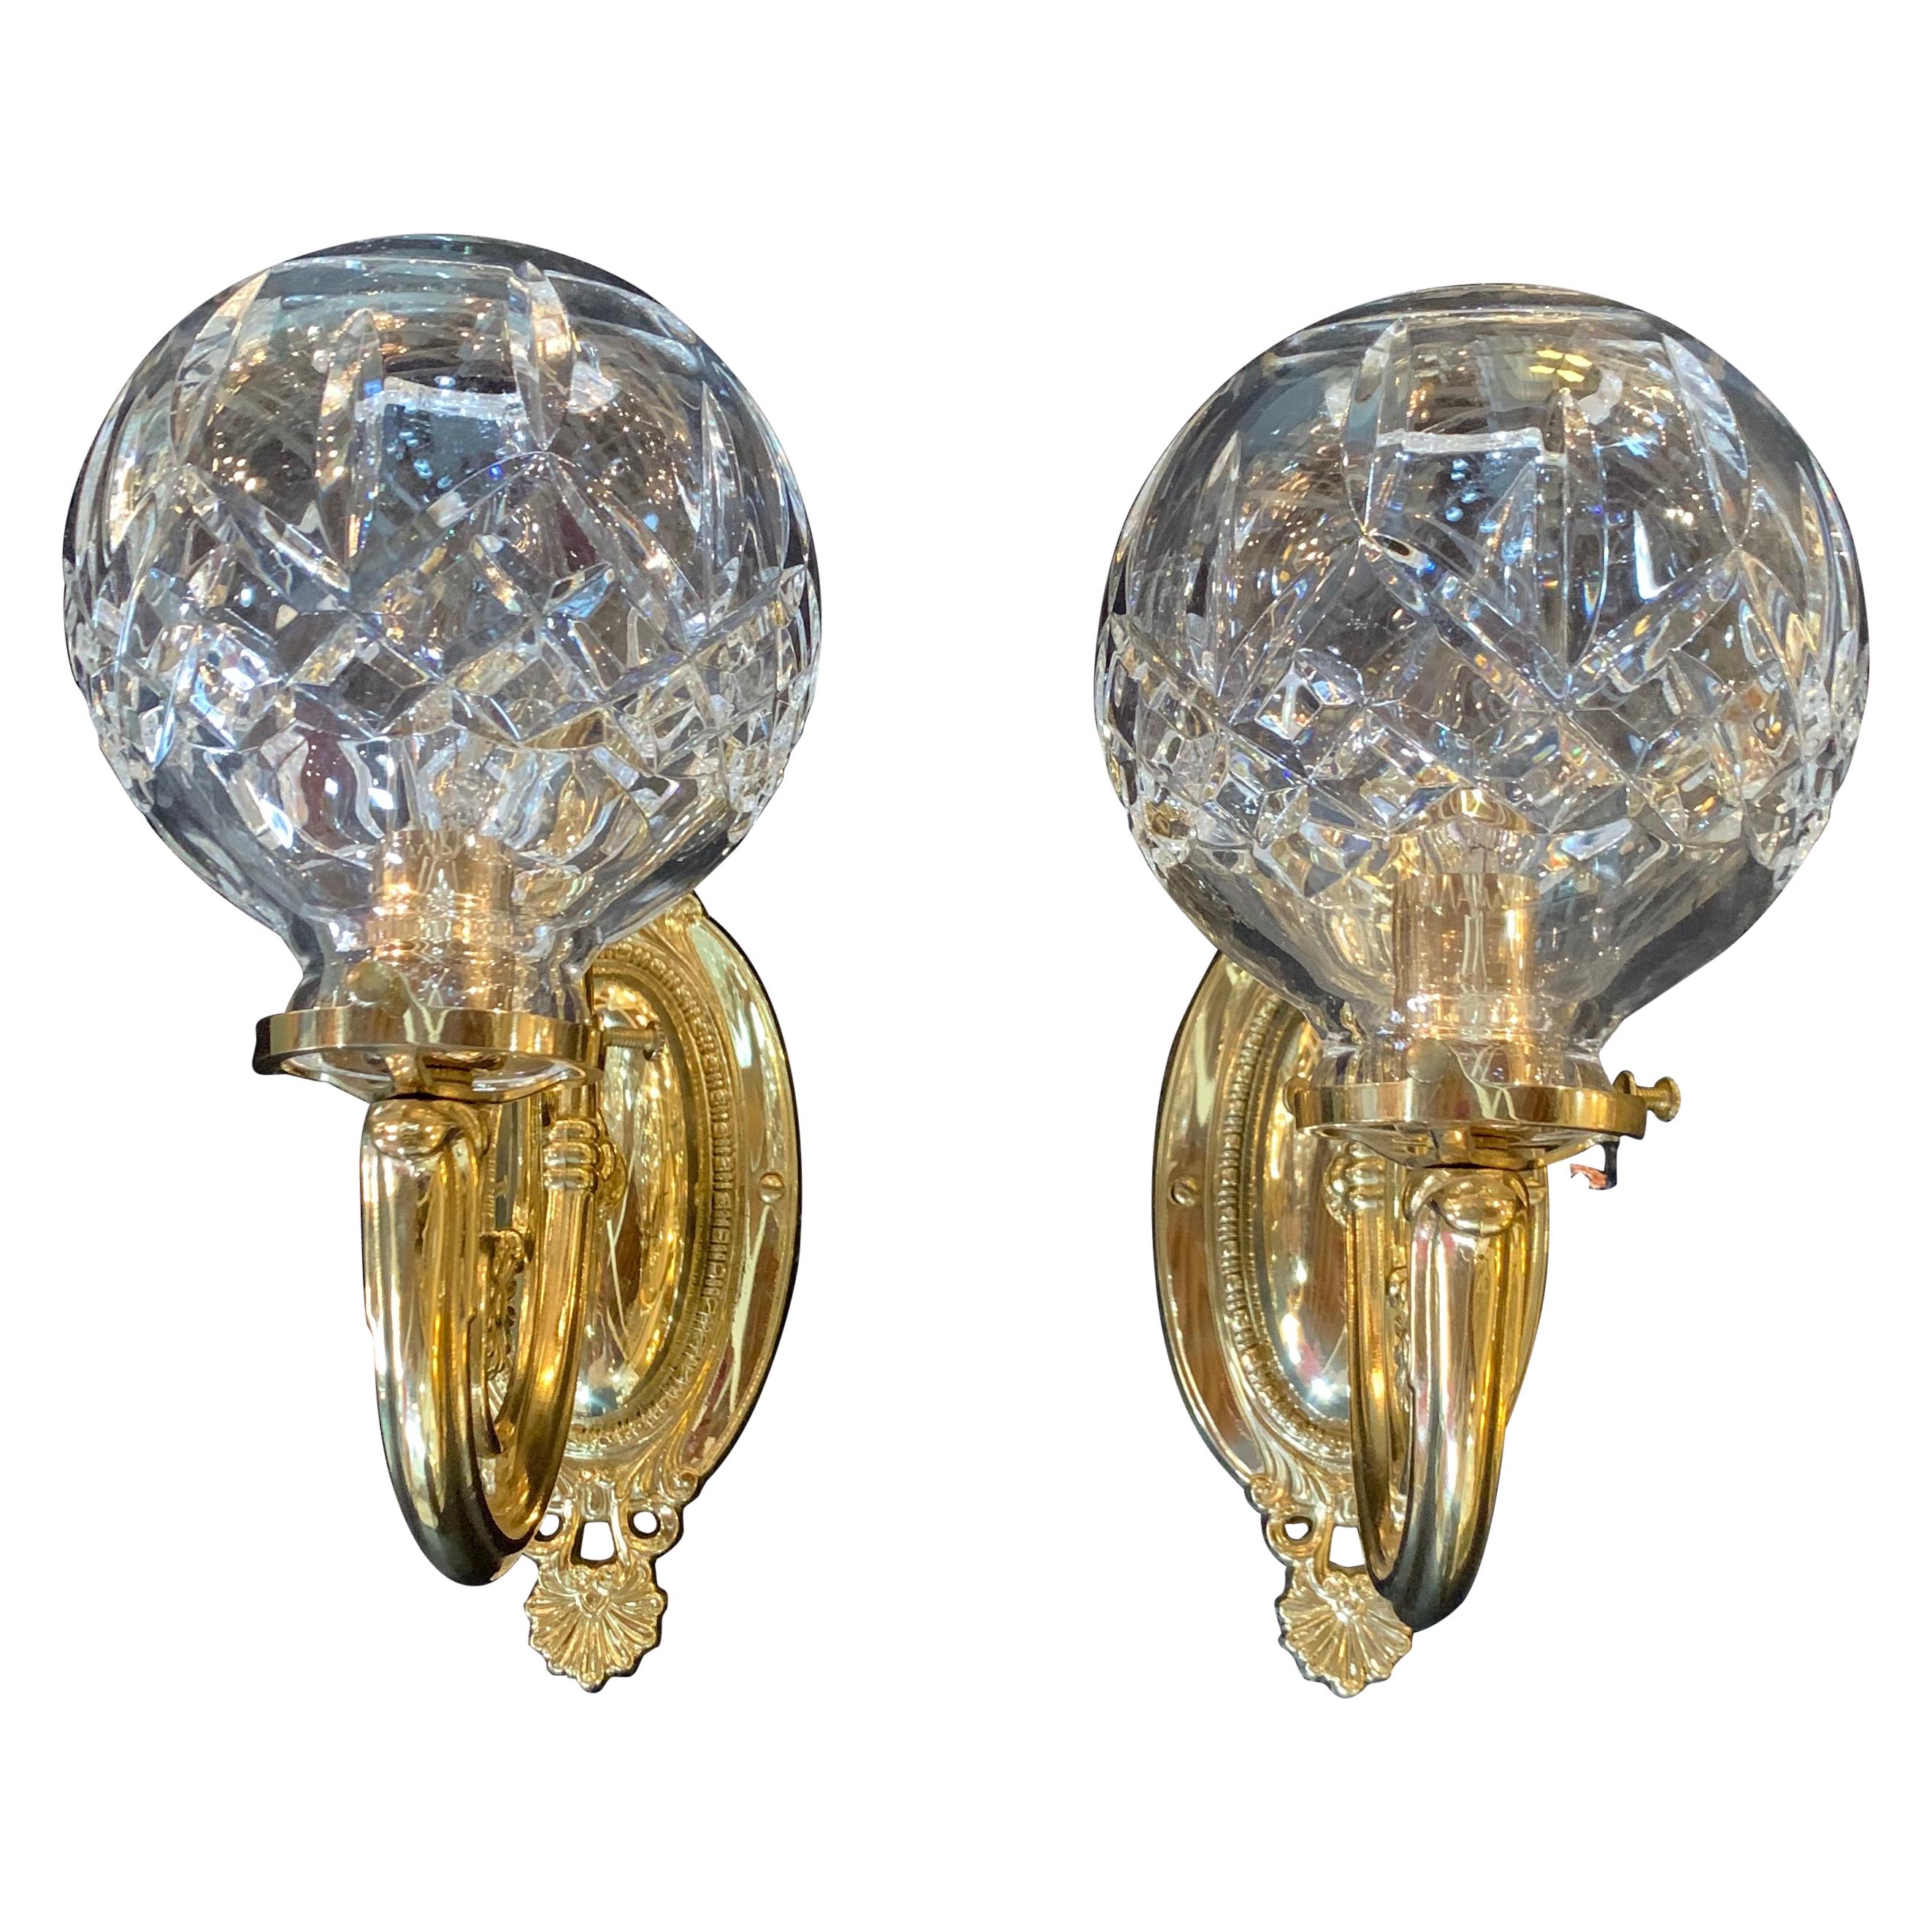 Hollywood Regency Style Waterford Brass & Crystal Single Light Wall Sconces Pair